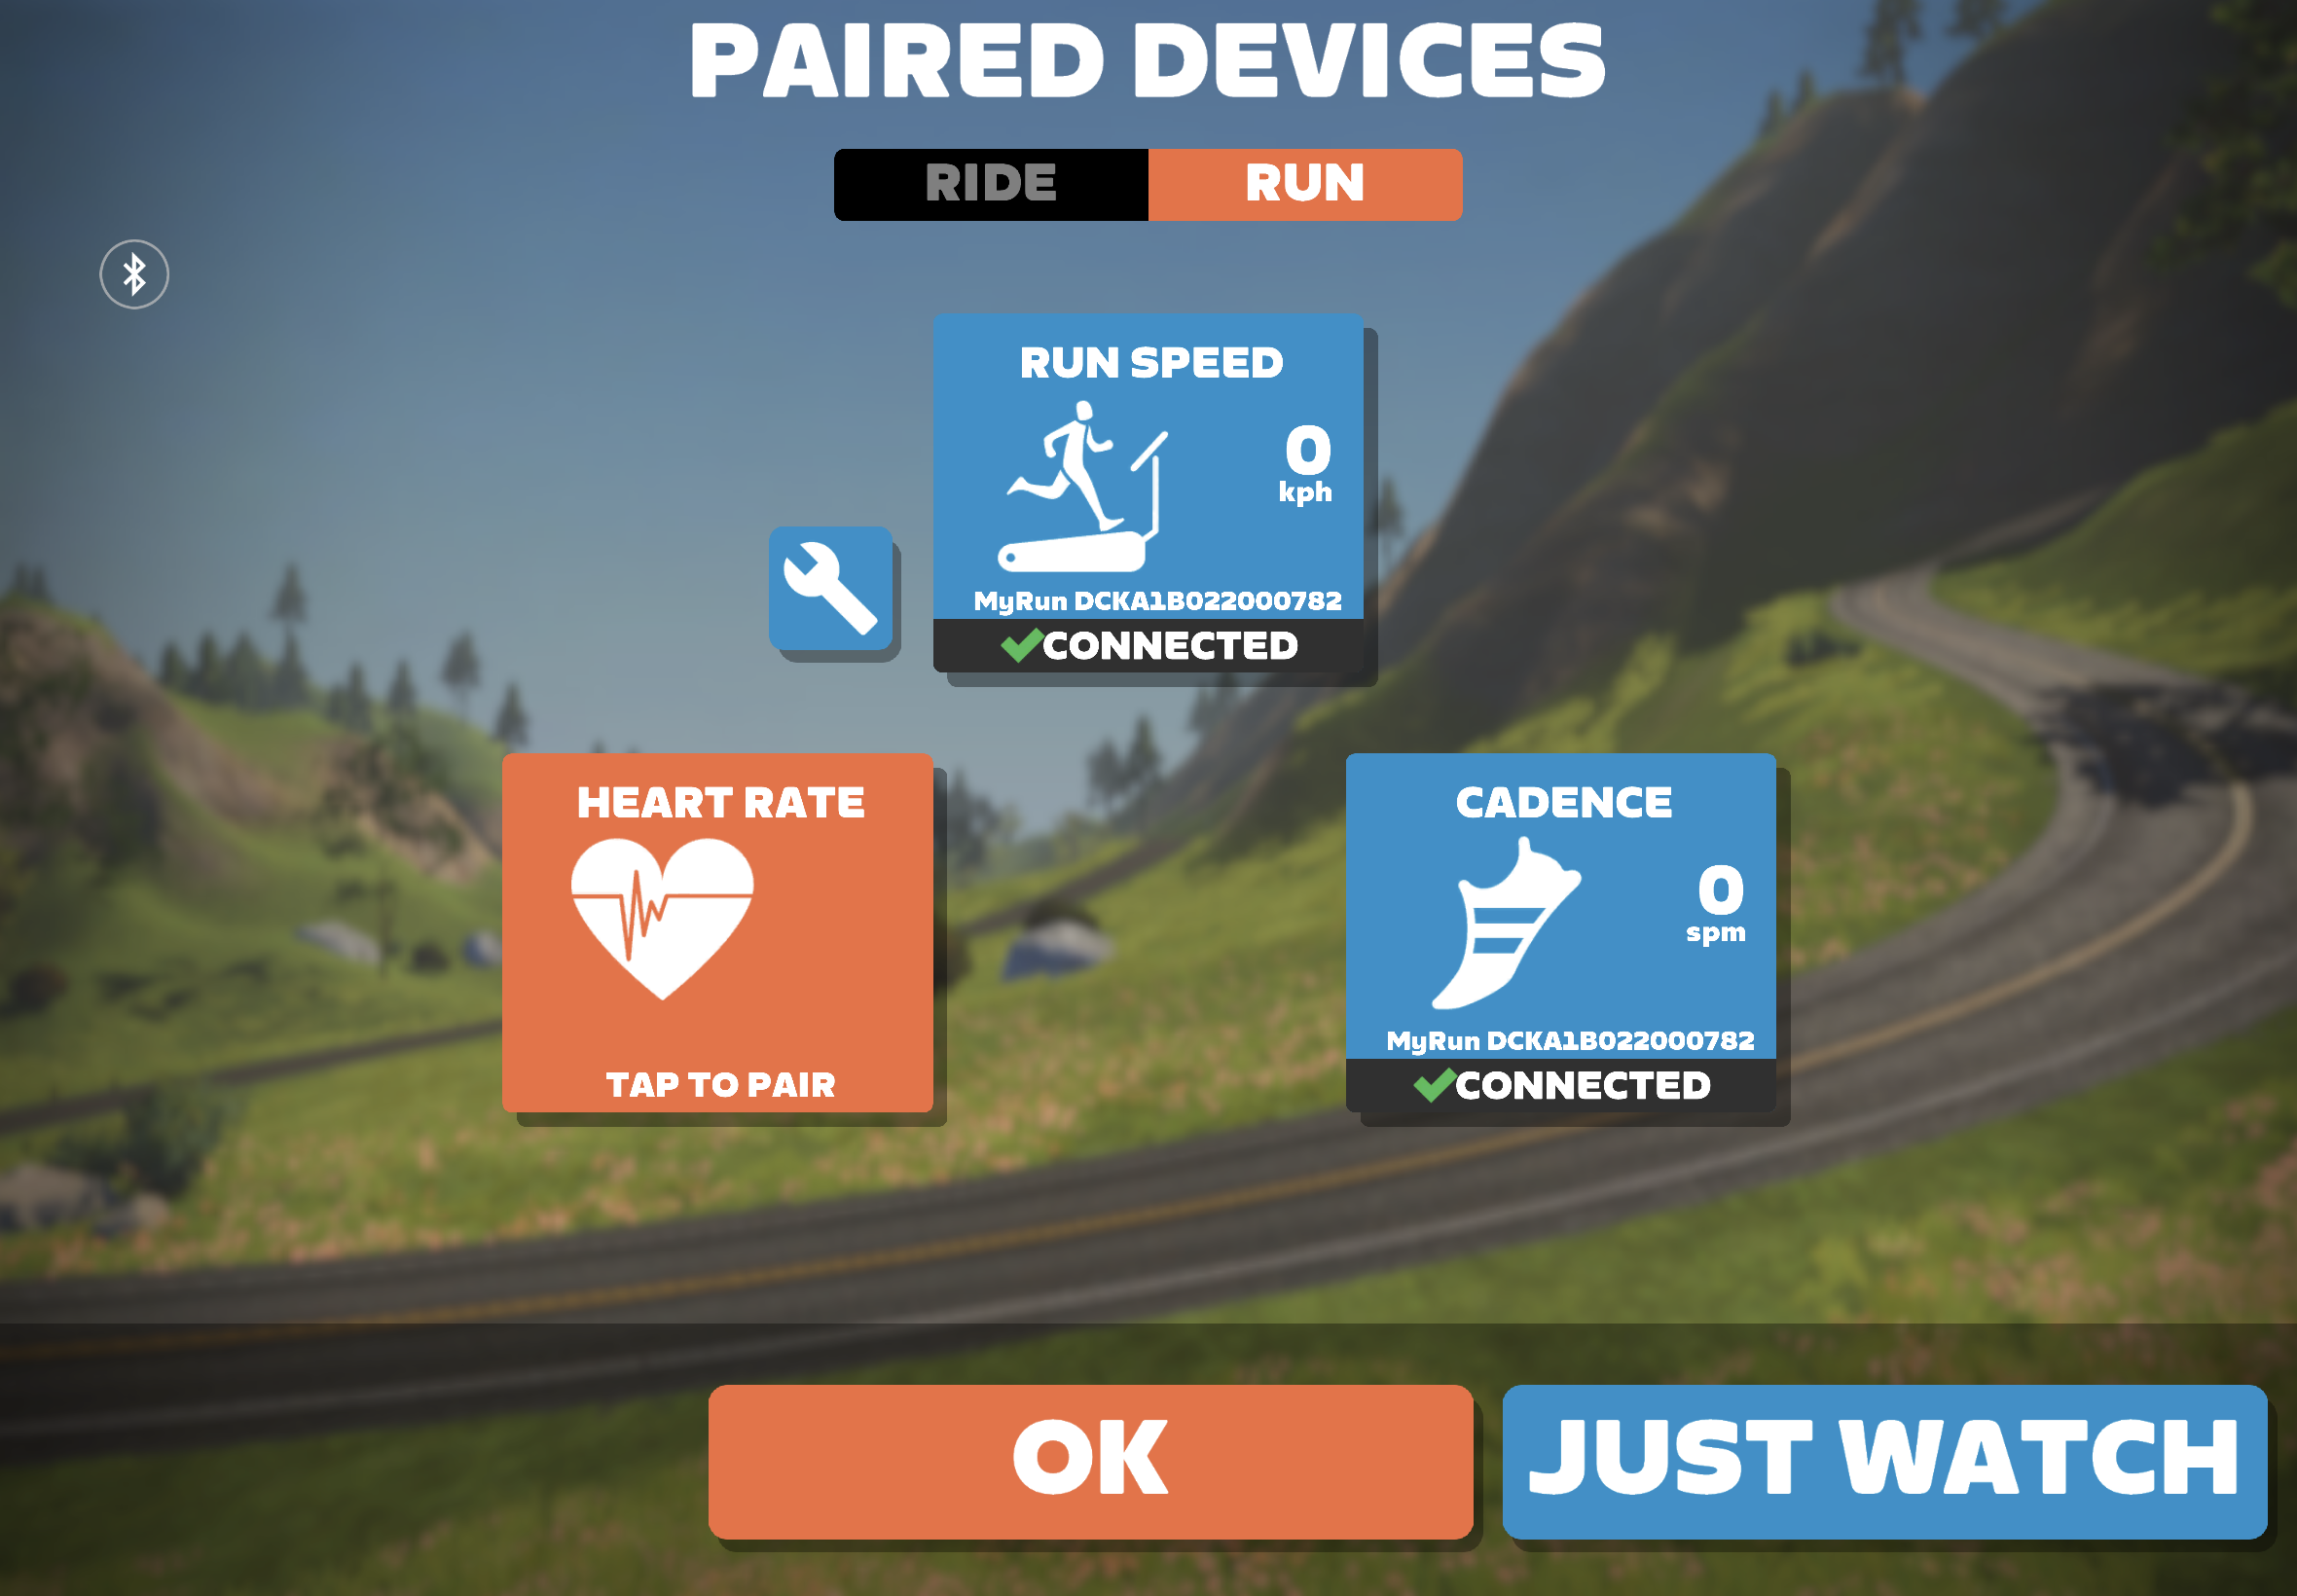 The running device pairing screen of Zwift, showing the Technogym MyRun treadmill connected as a "run speed" sensor and a "cadence" sensor.